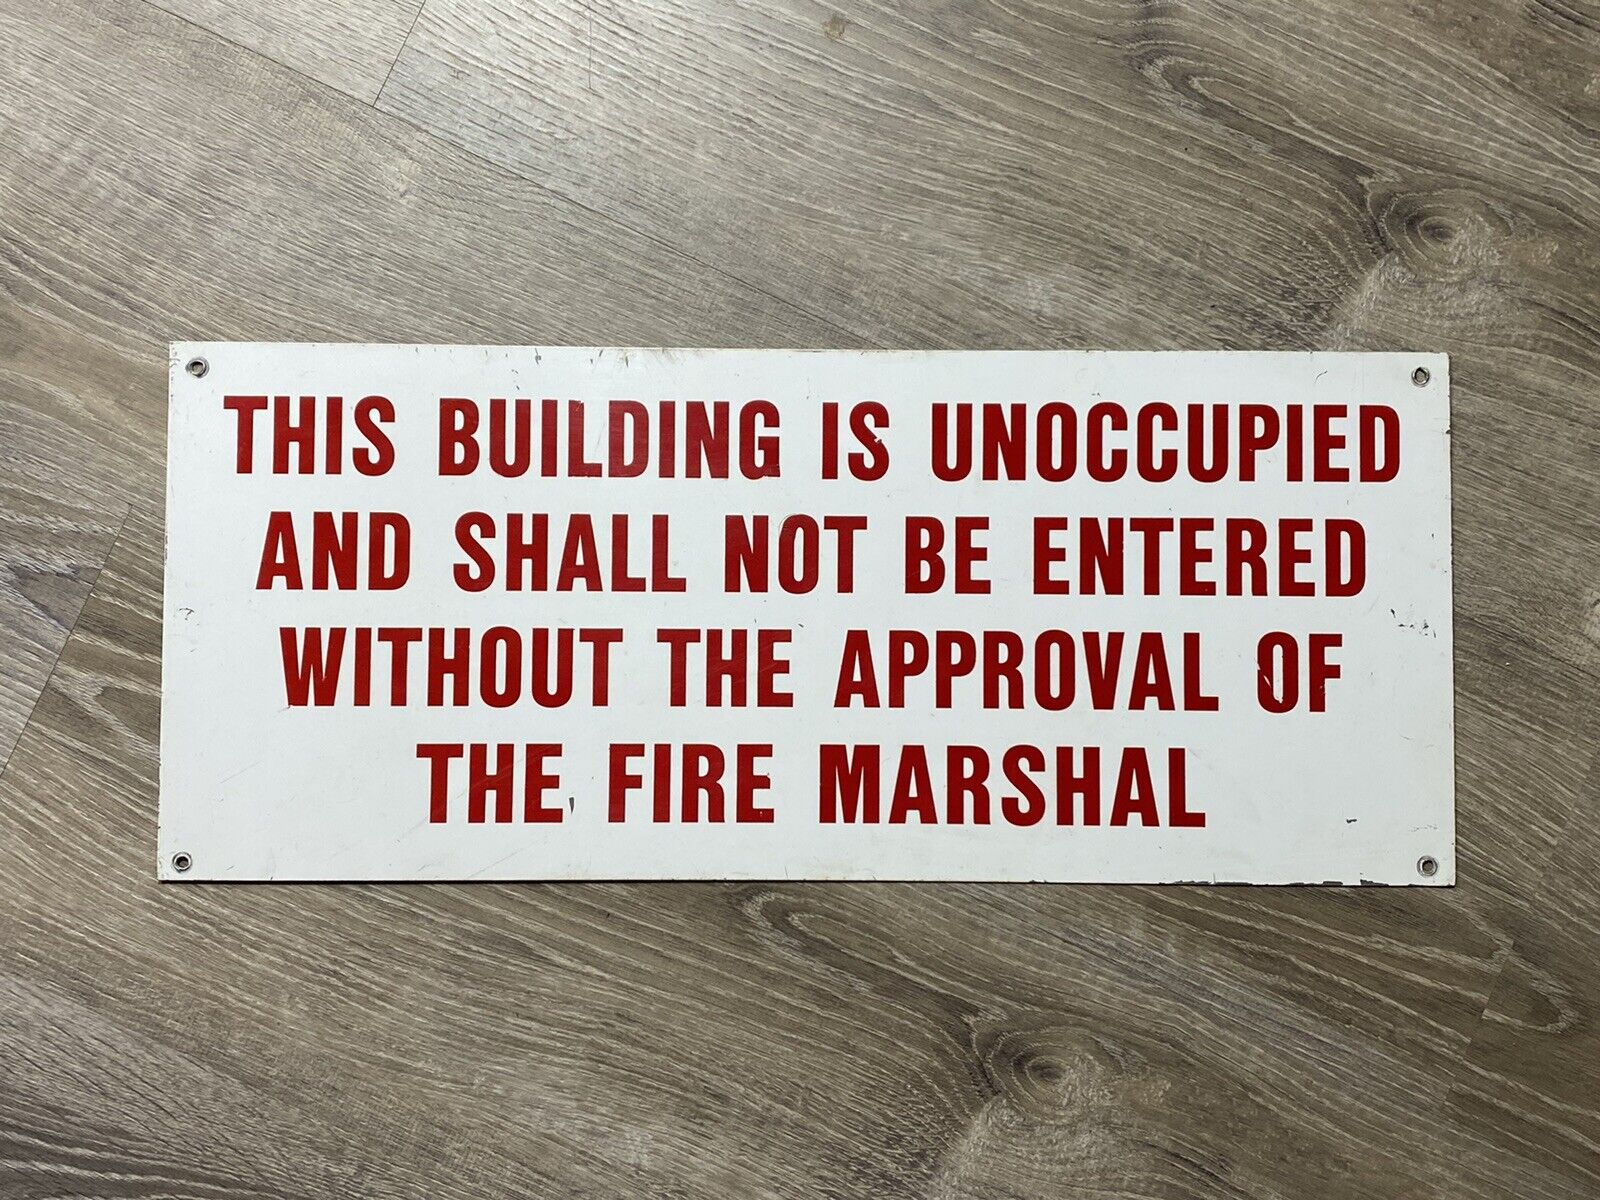 Vintage Building Is Unoccupied No Entry Fire Marshall Approval Metal Sign 24x10”